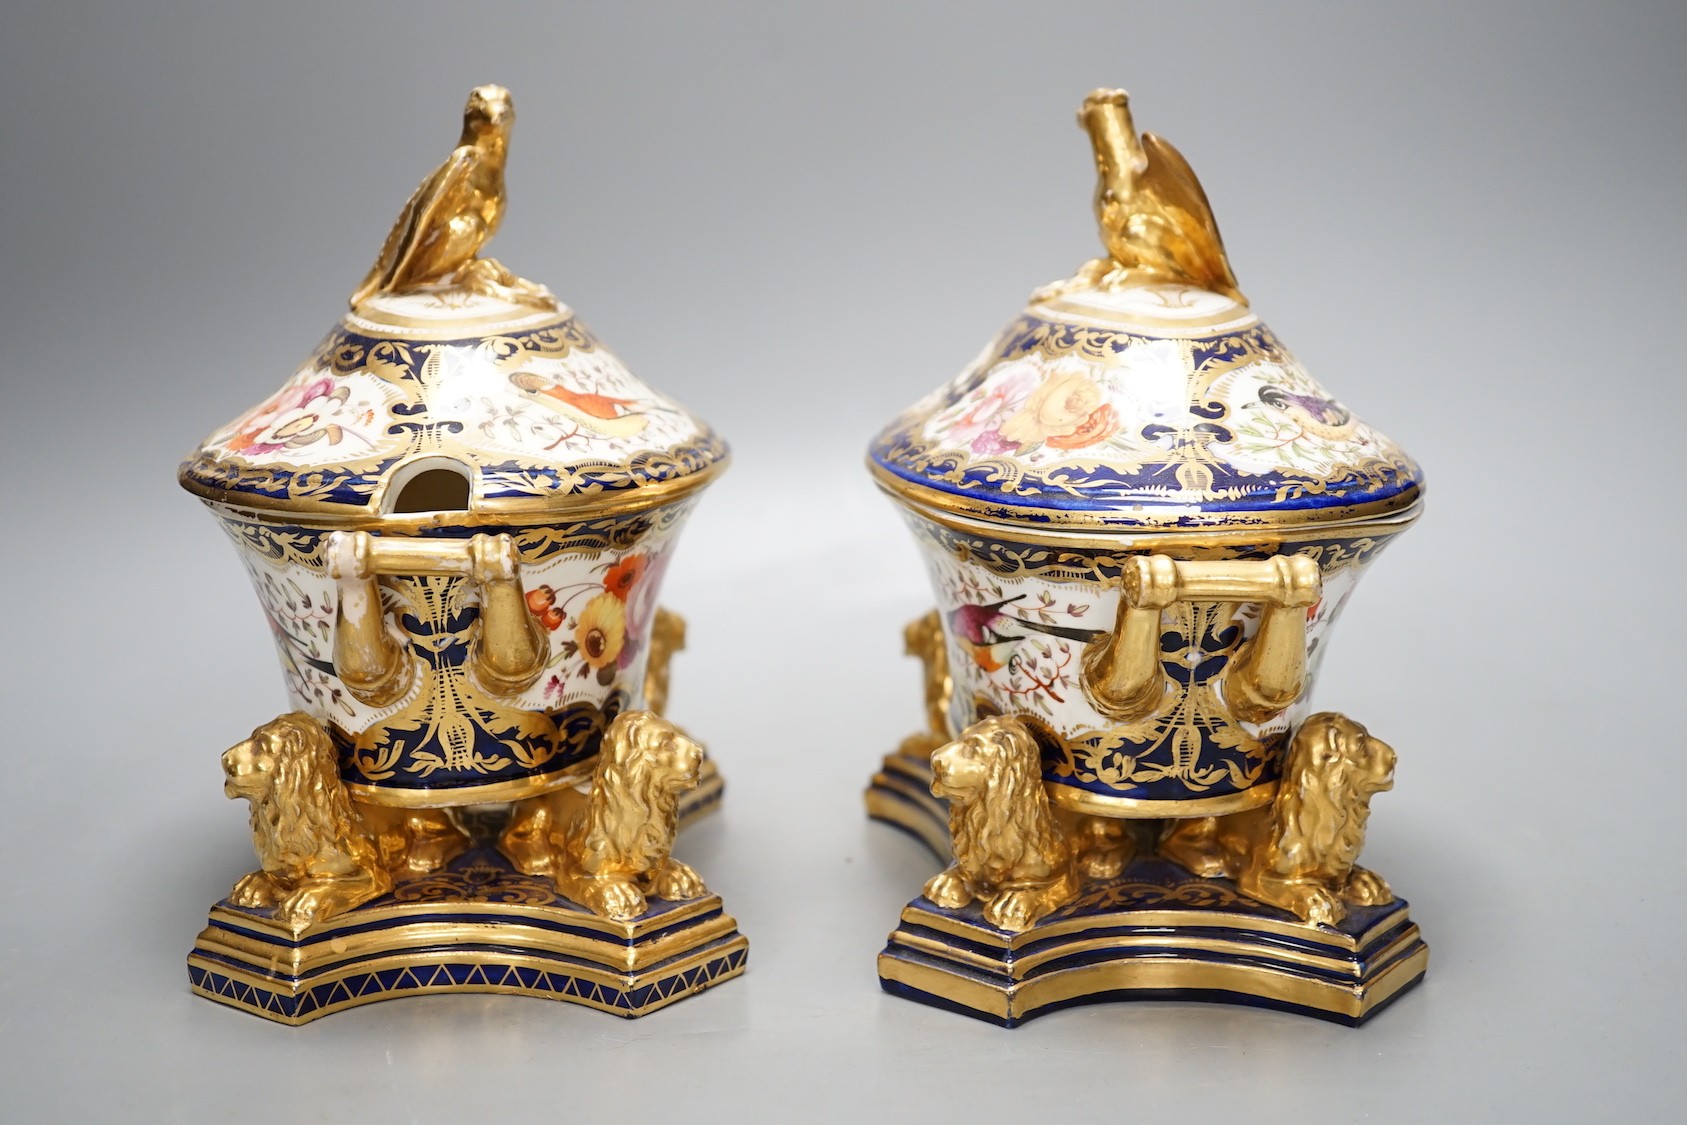 A pair of unusual English porcelain Imari sauce tureens, covers and stands, possibly Coalport c.1820, 19cm tall